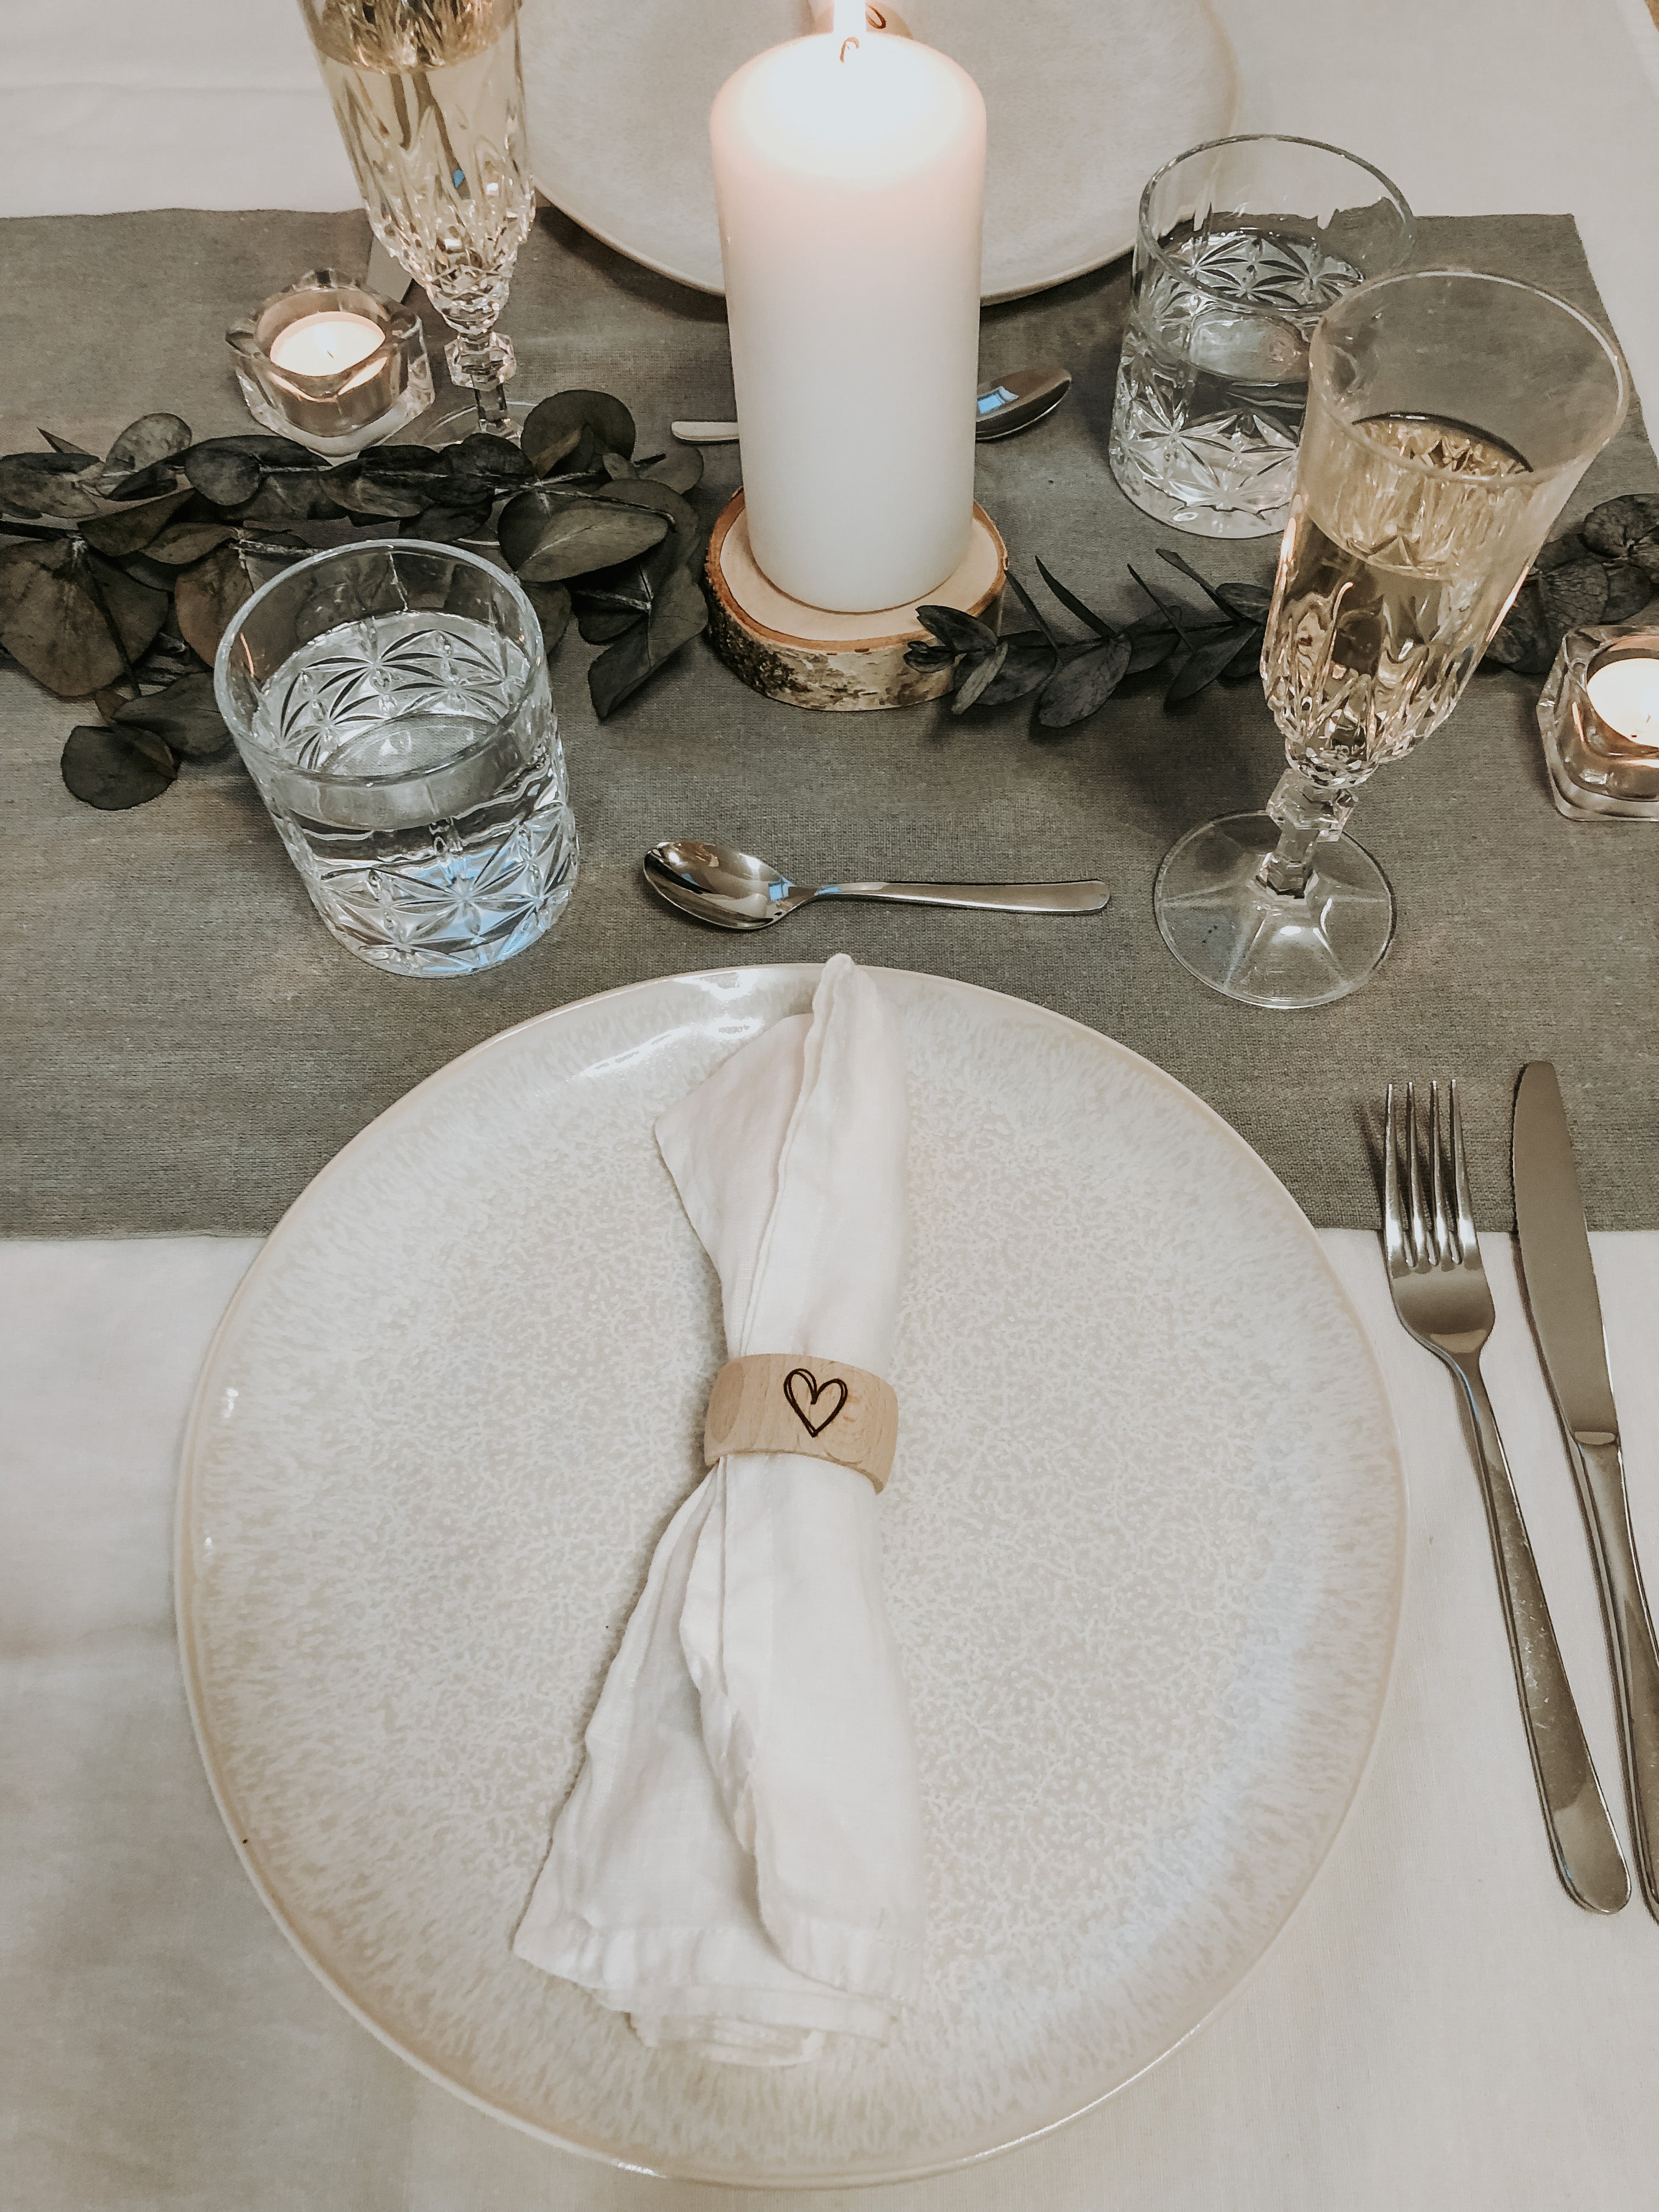 Wooden napkin ring with a heart